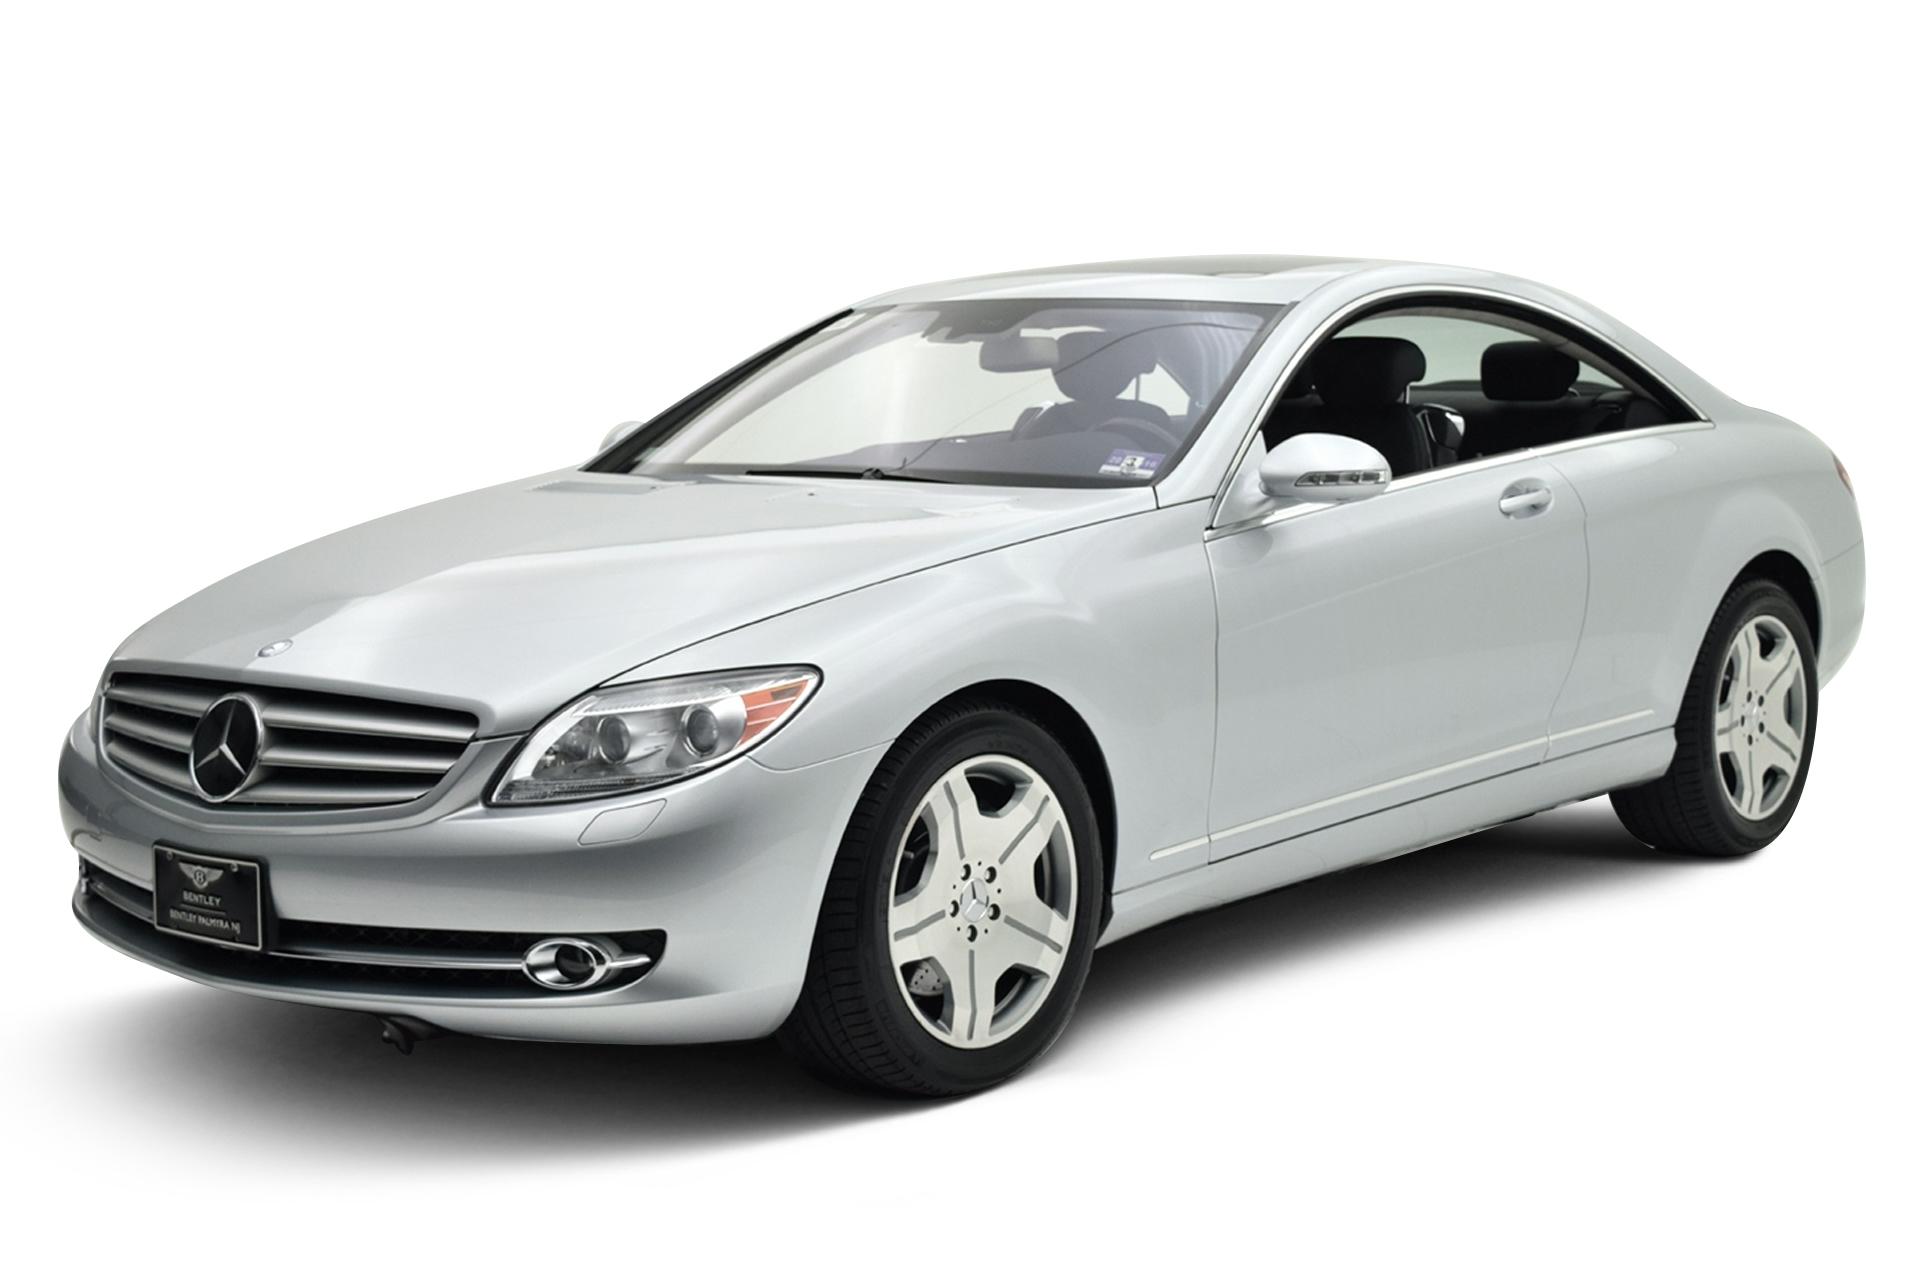 Used 2007 Mercedes-Benz CL-Class 5.5L V12 CL600 For Sale (Sold) | FC  Kerbeck Stock #15BE124MJI